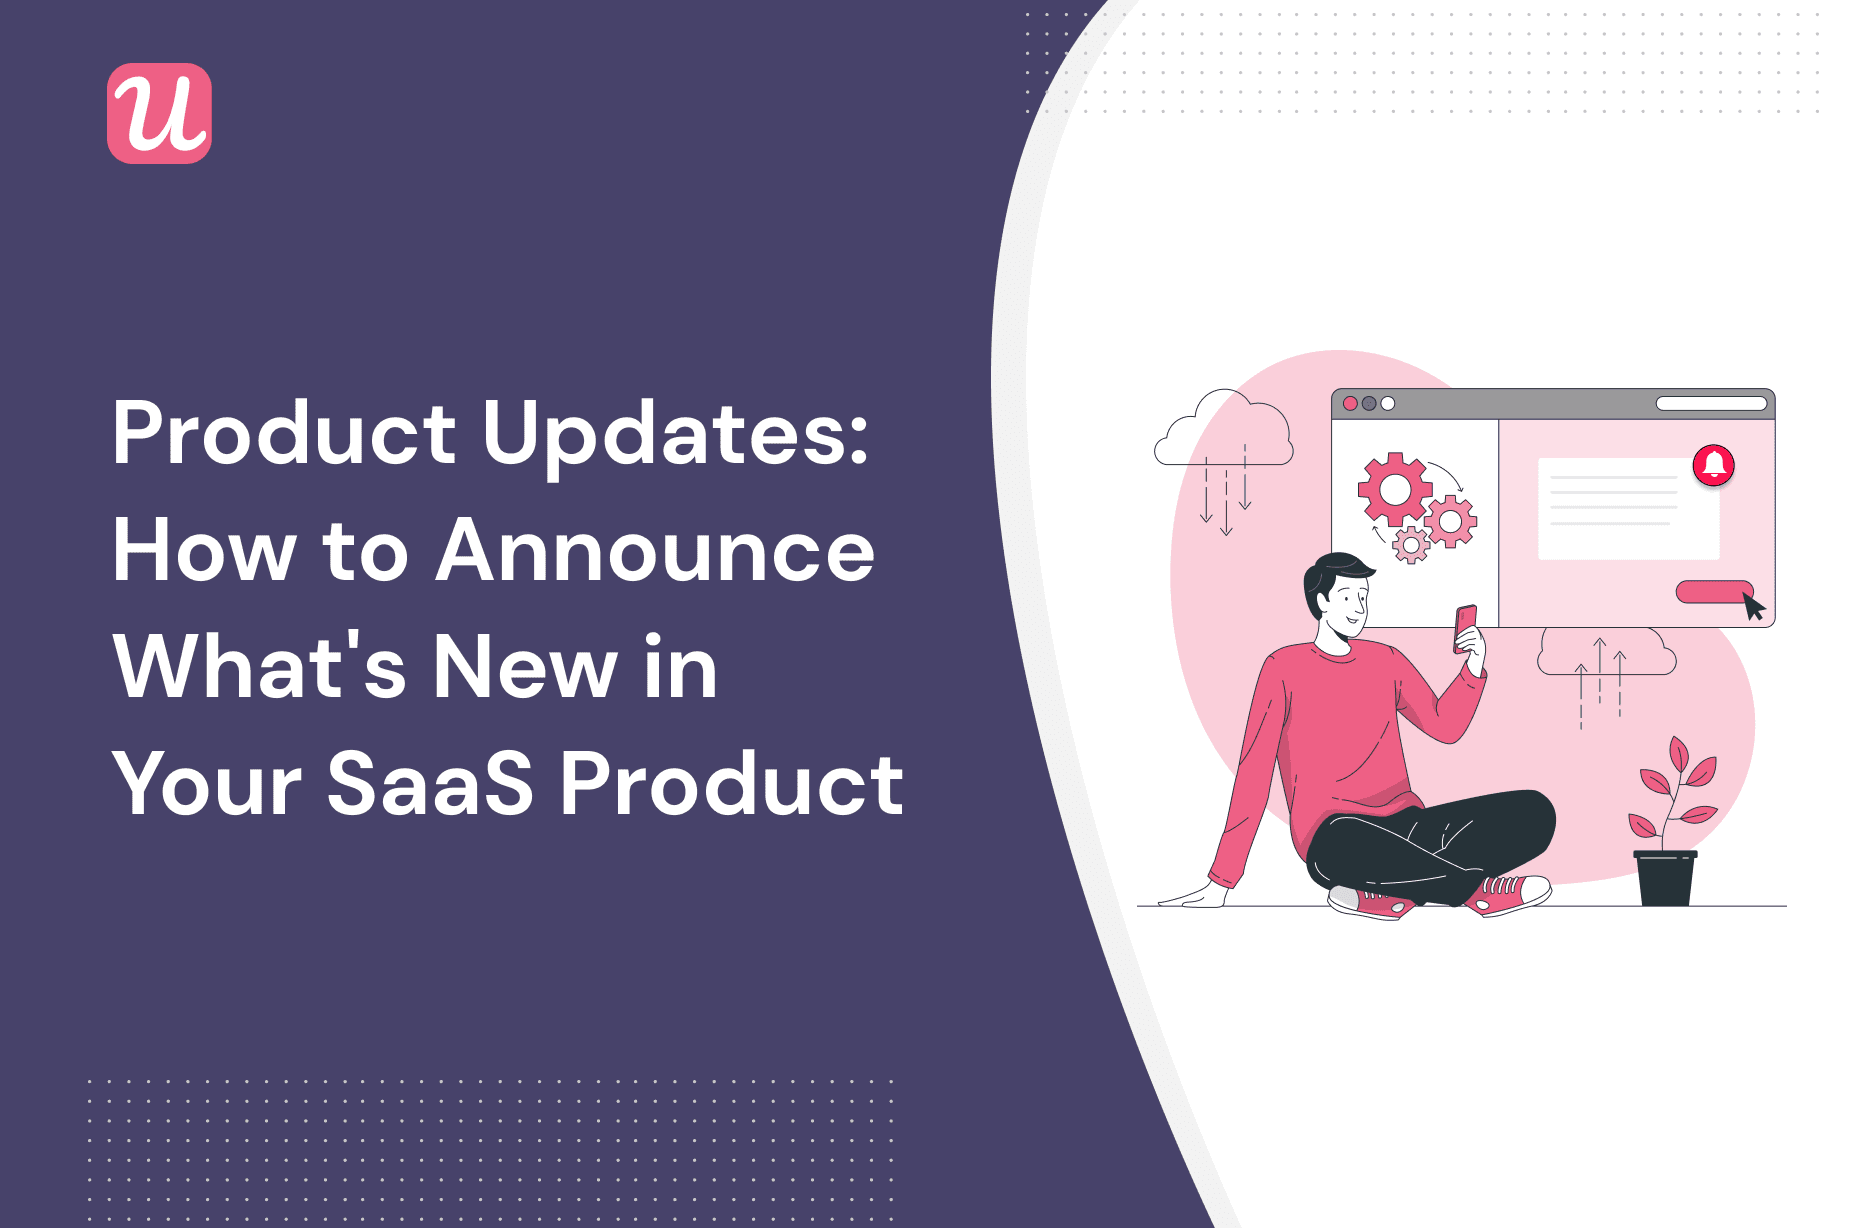 Product Updates: How to Announce What's New in Your SaaS Product